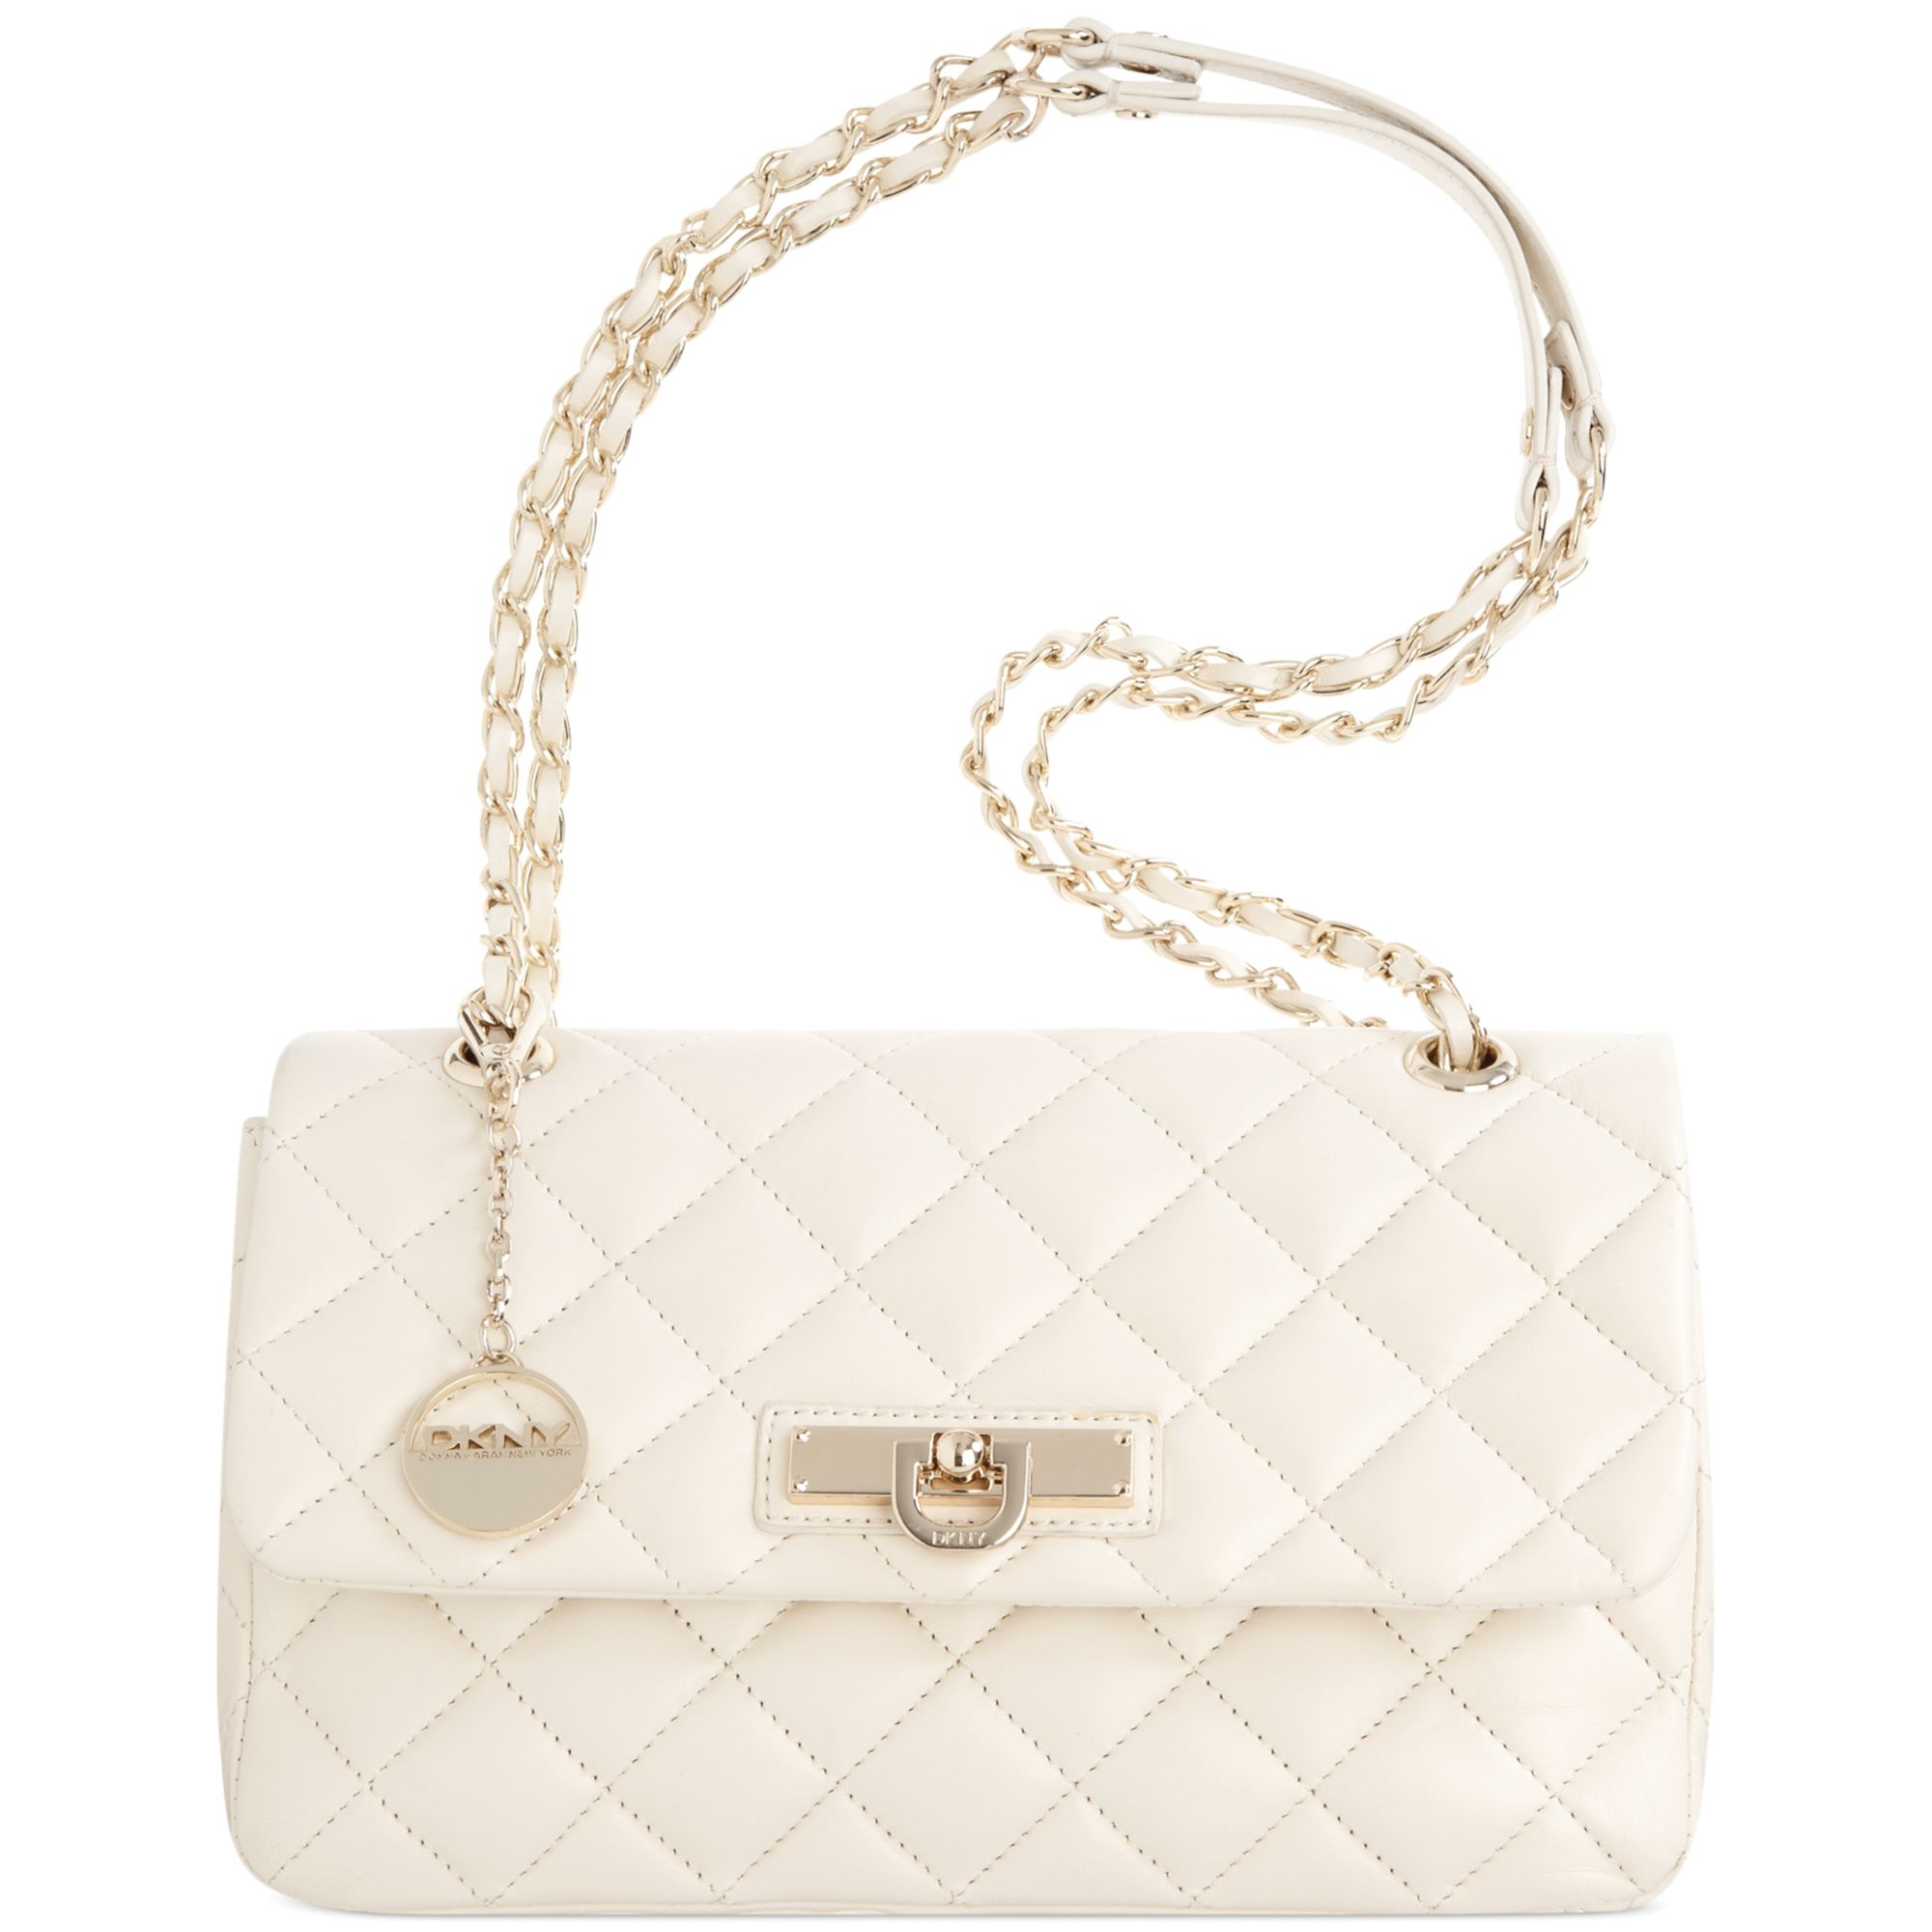 Lyst - Dkny Gansevoort Quilted Chain Shoulder Bag in White